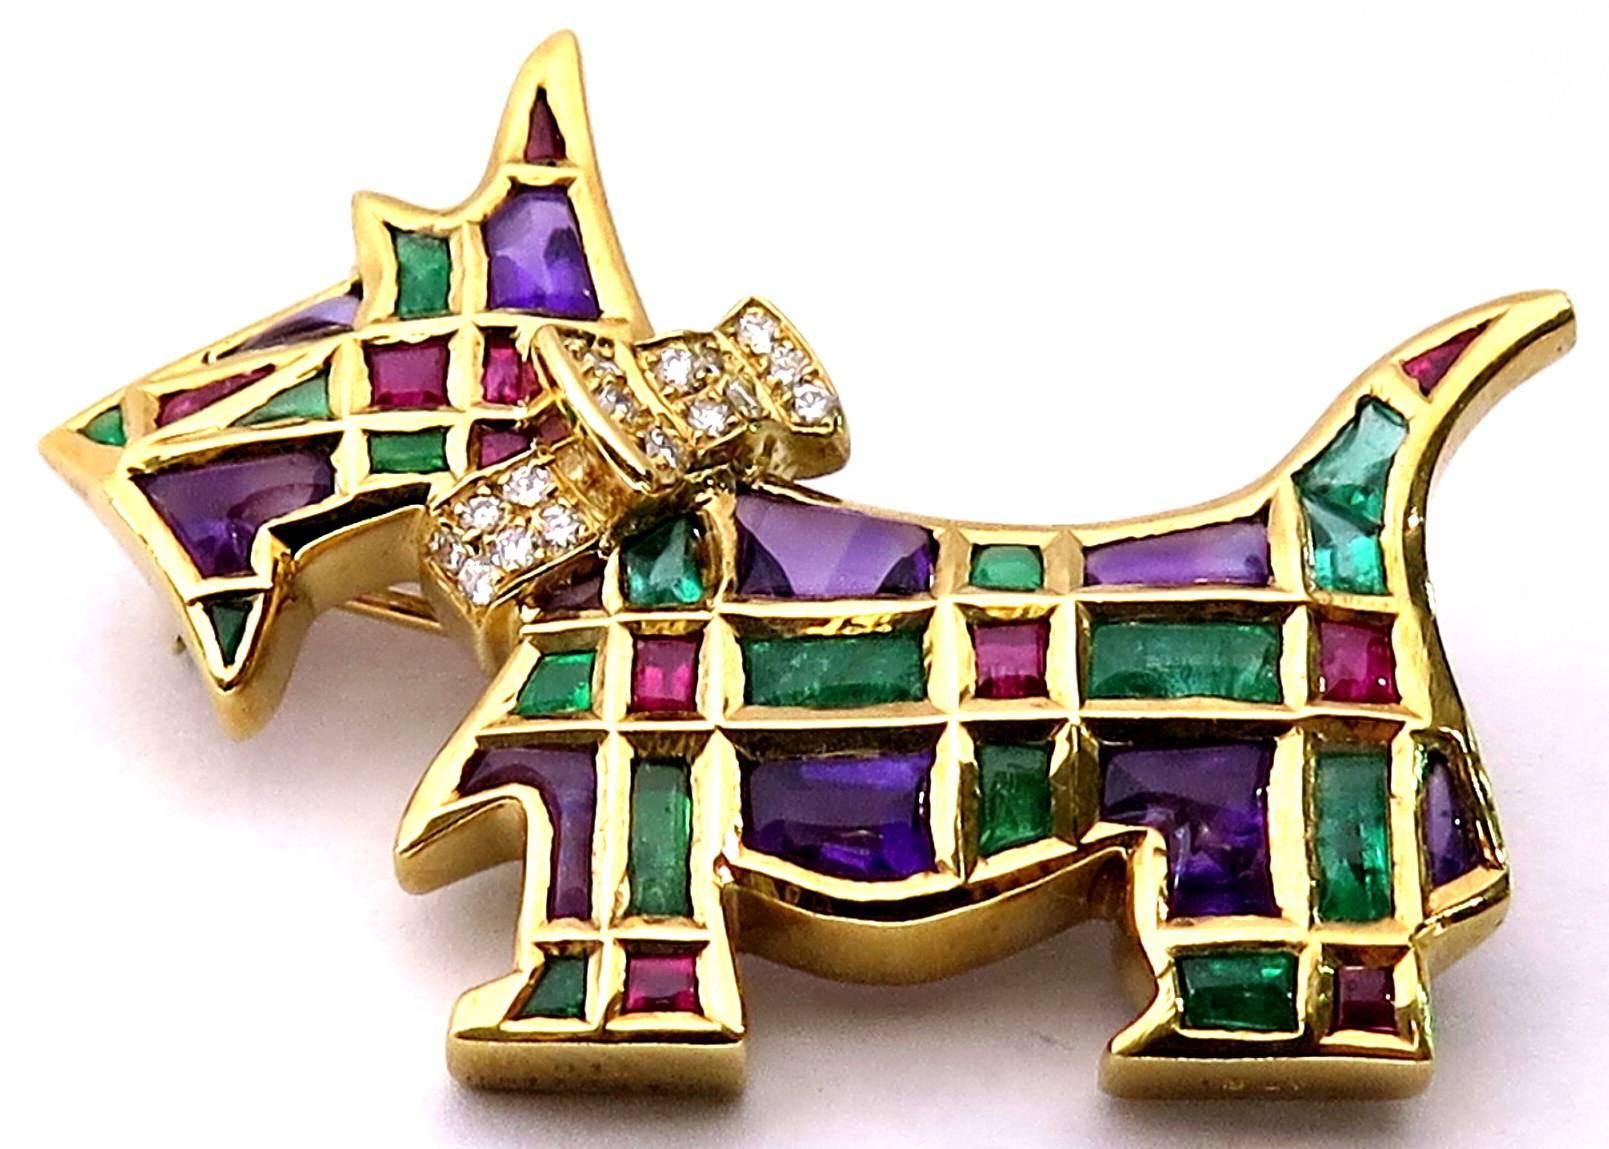 This fabulous little fella is so adorable, you will want to take him home for yourself! He is 18k yellow gold and accented with diamonds, rubies, emeralds, and amethysts all cabochons, calibrated perfectly into his irresistibly shaped body. He is